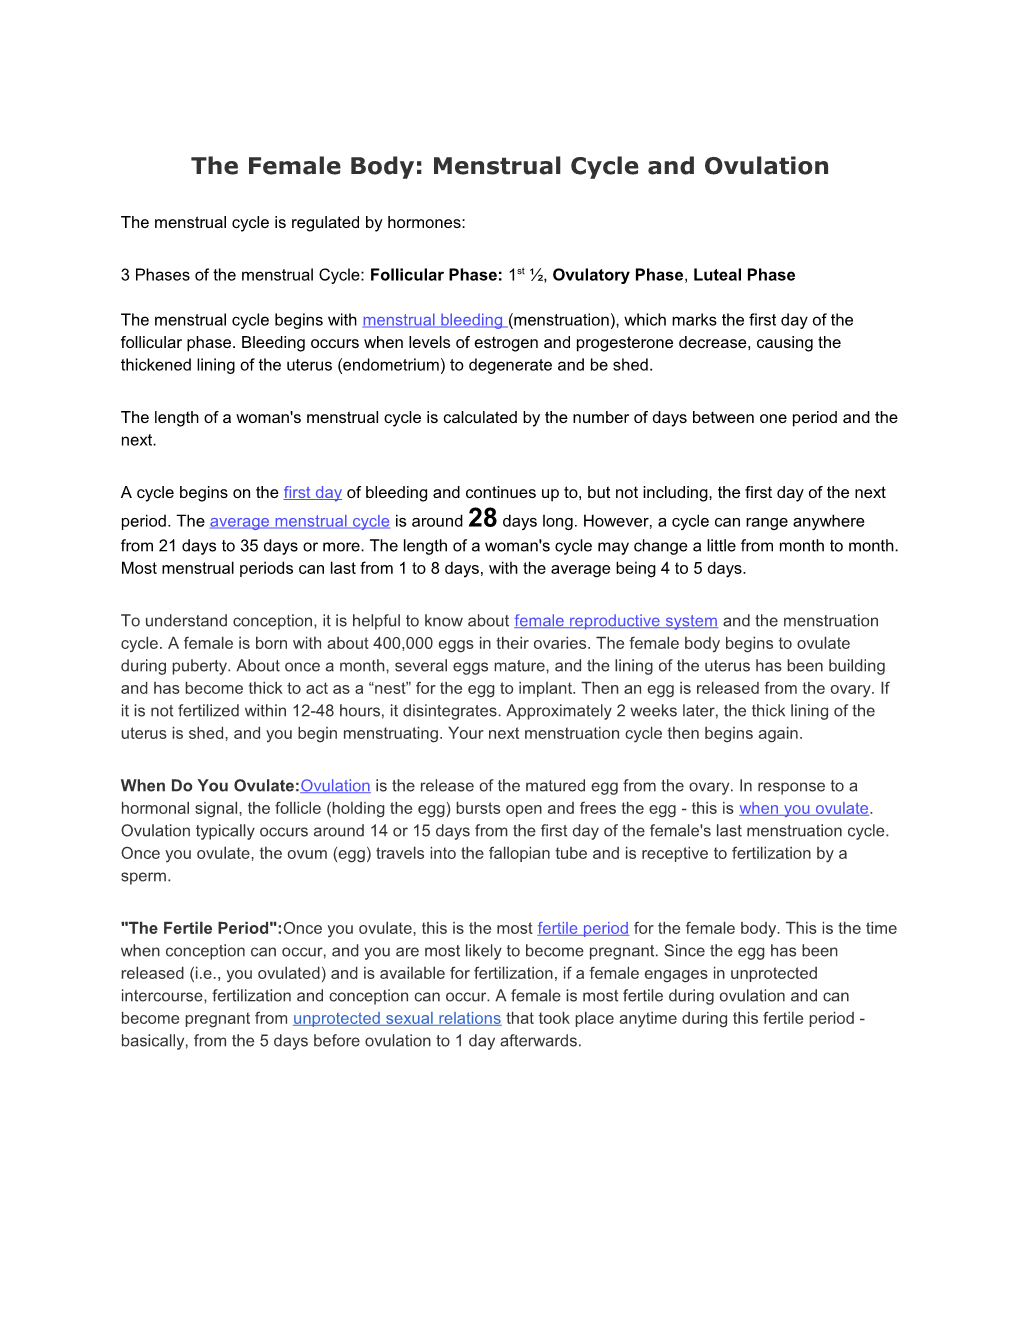 The Female Body: Menstrual Cycle and Ovulation